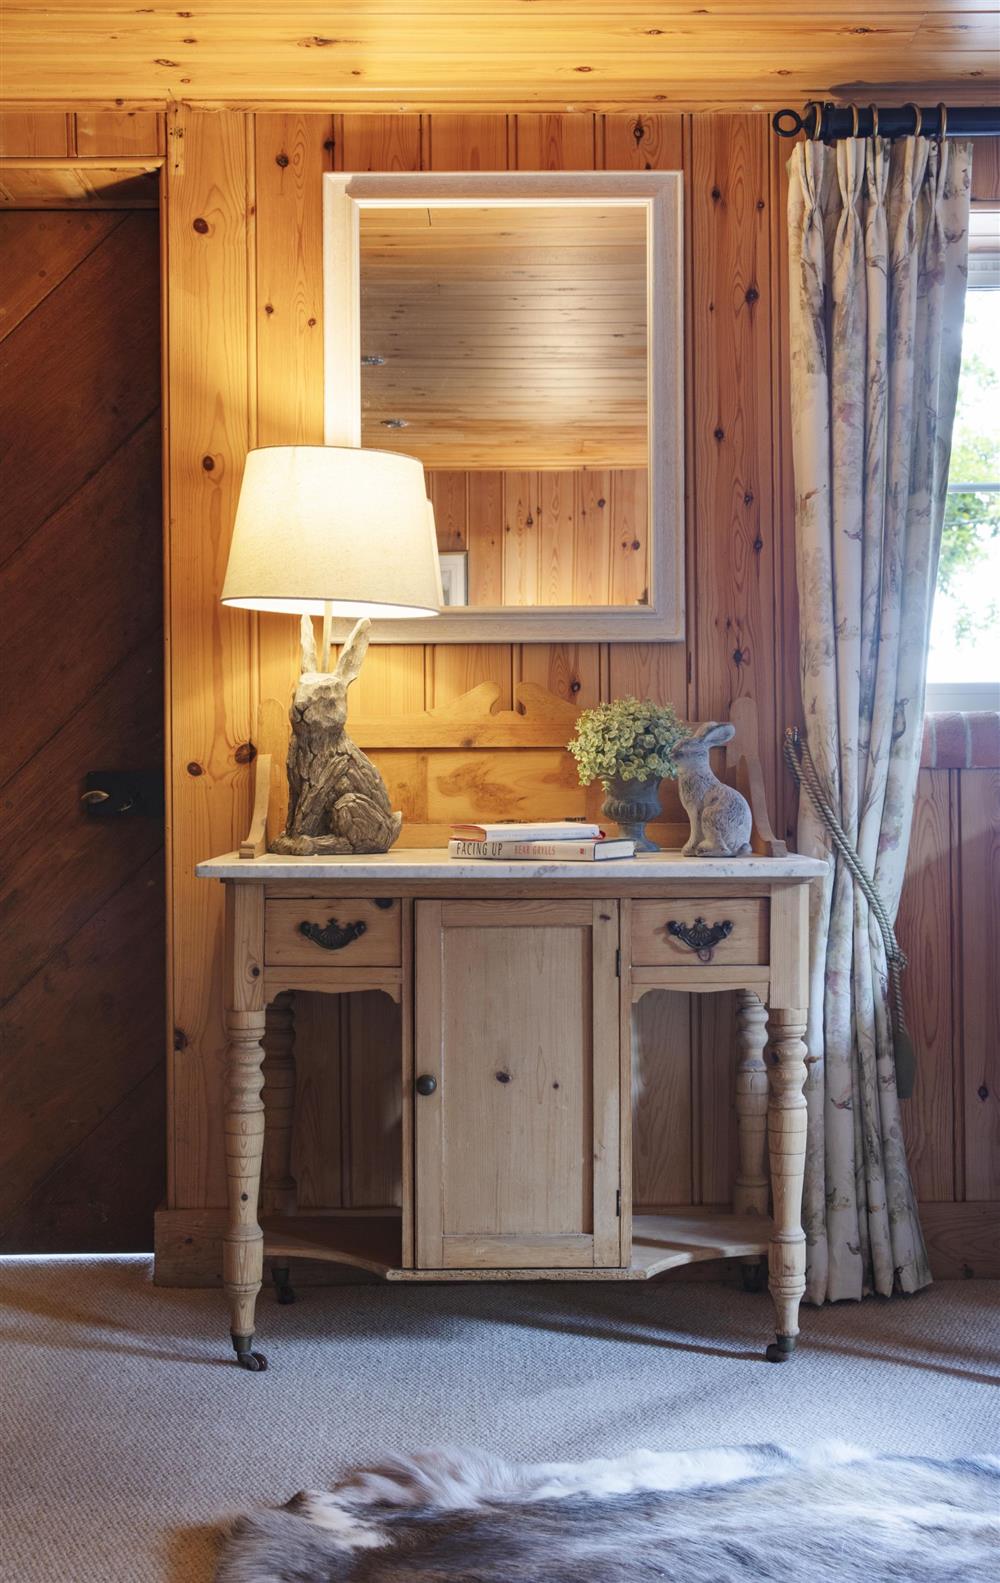 The attractive features create a warm and relaxing atmosphere at The Shooting Lodge, Dorset